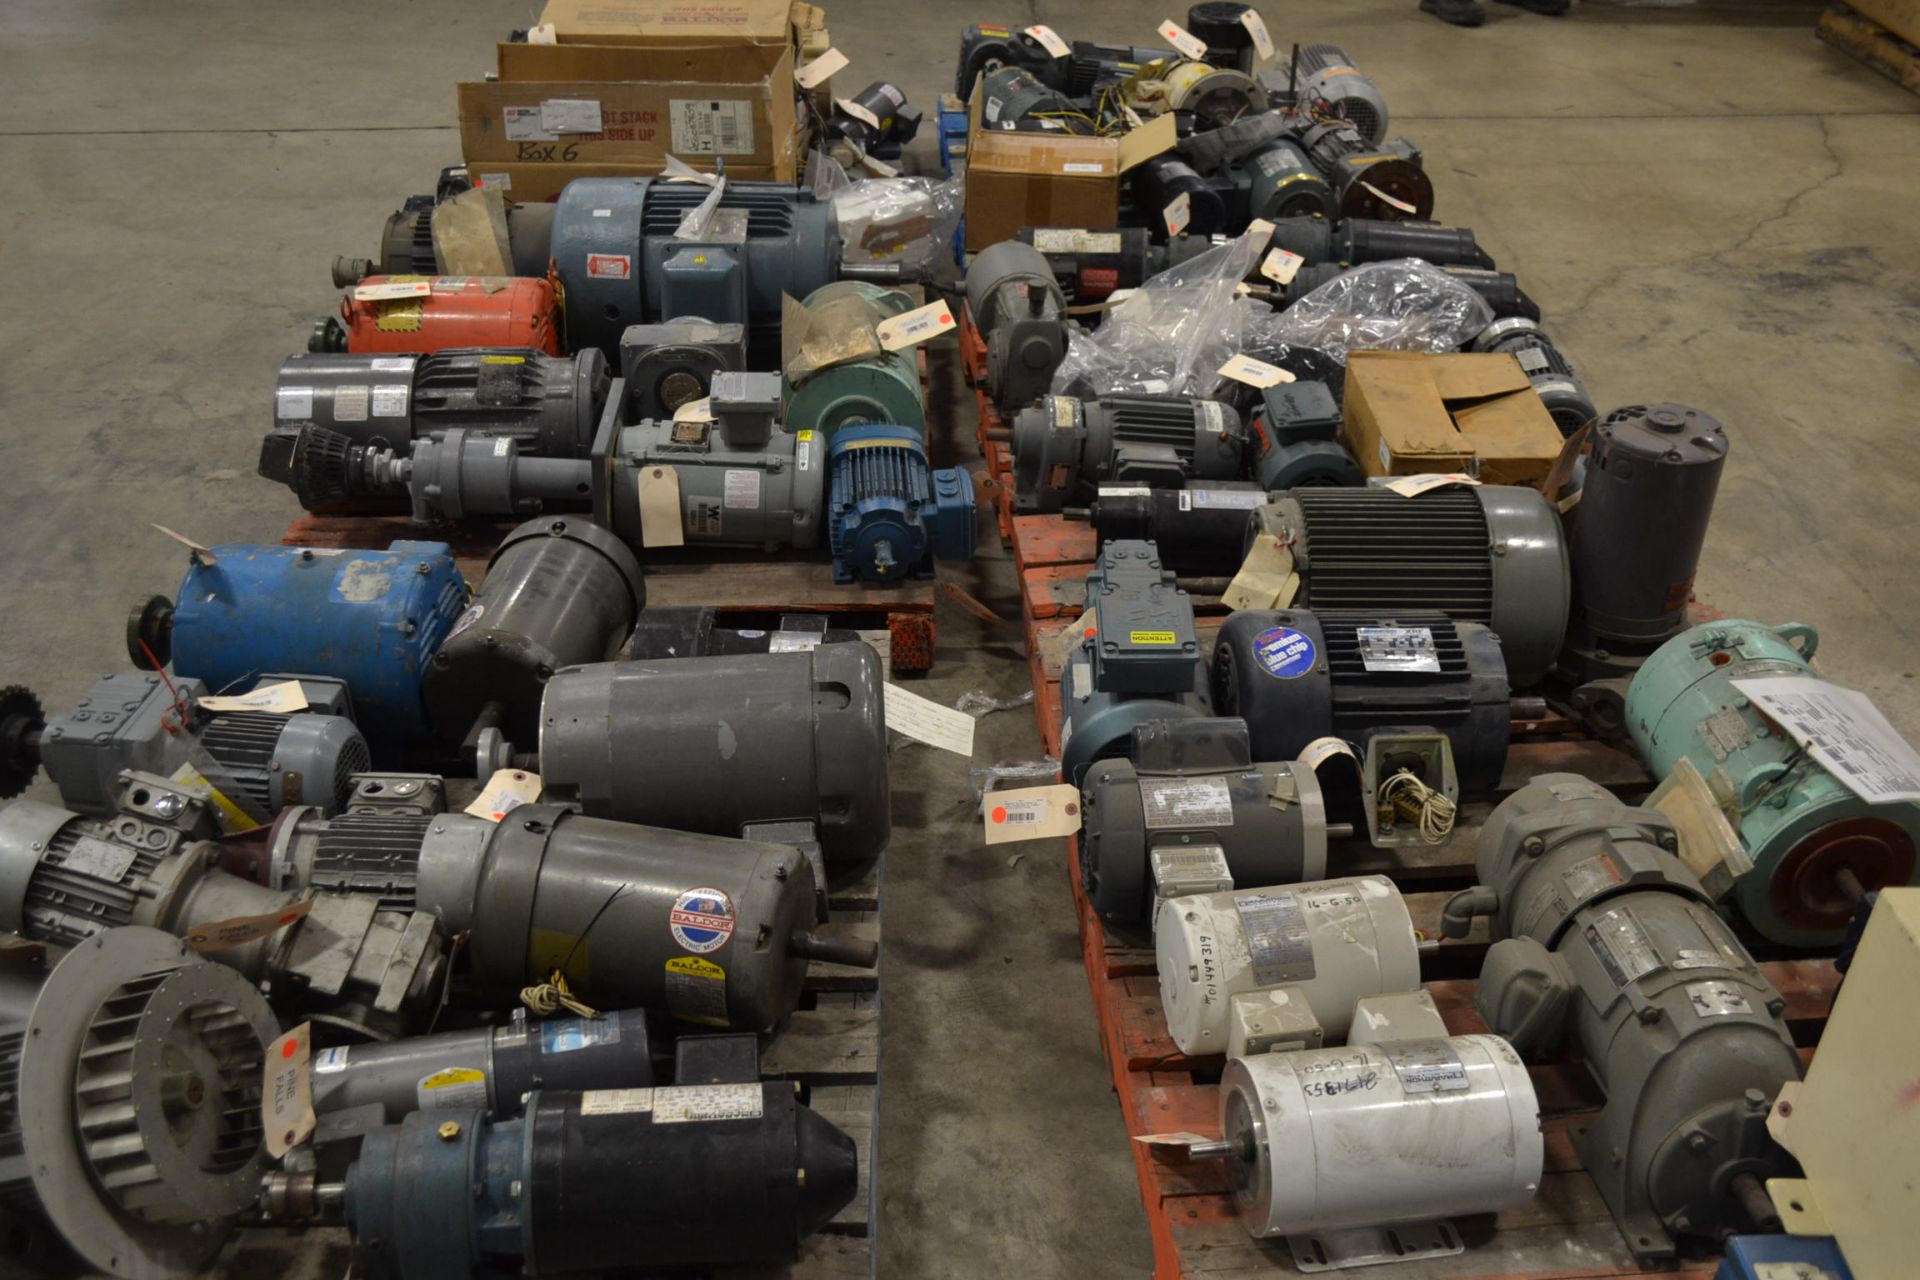 LOT OF SMALL MOTORS, 1 - 10 HP, APPROXIMATELY 65 MOTORS - Image 3 of 3